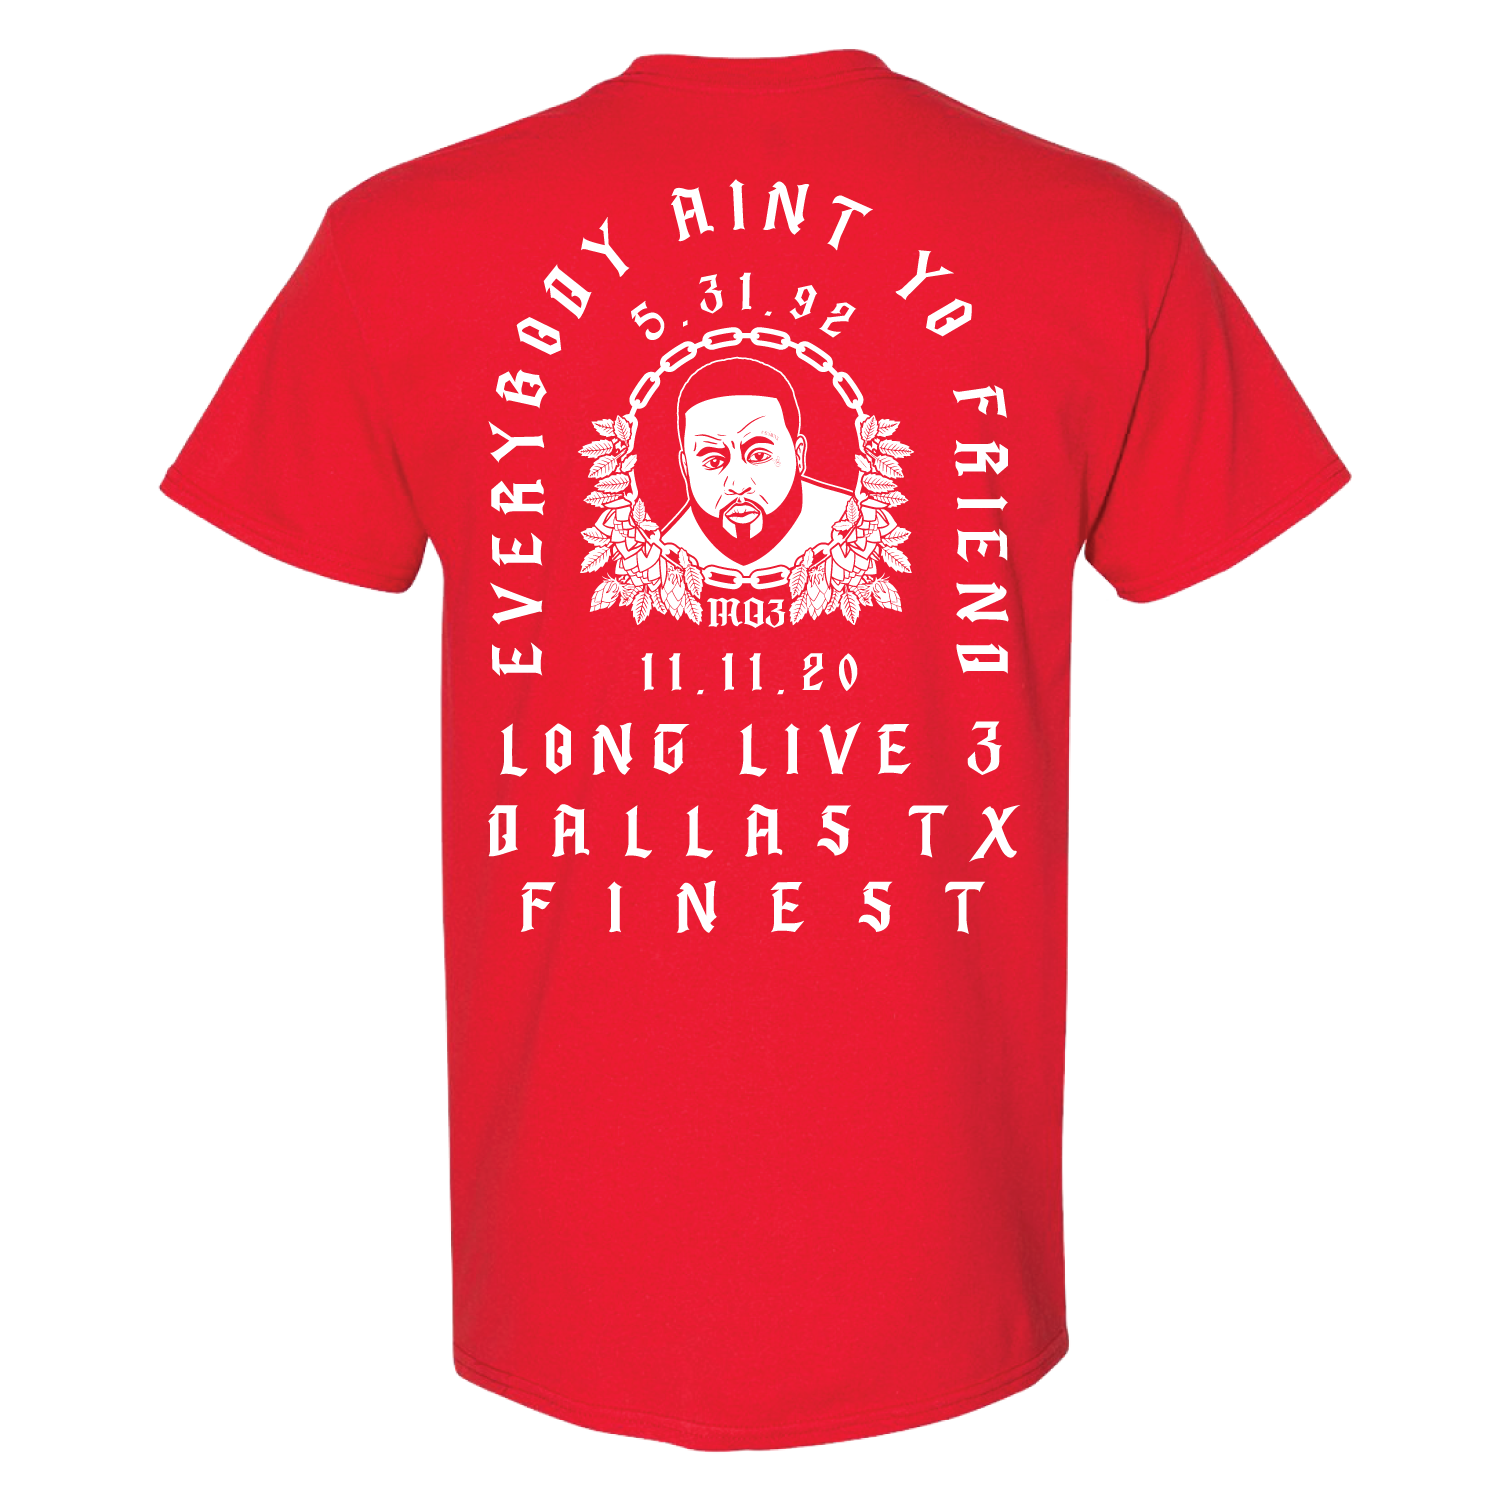 LONG LIVE 3 Memorial Tee - Red - Front